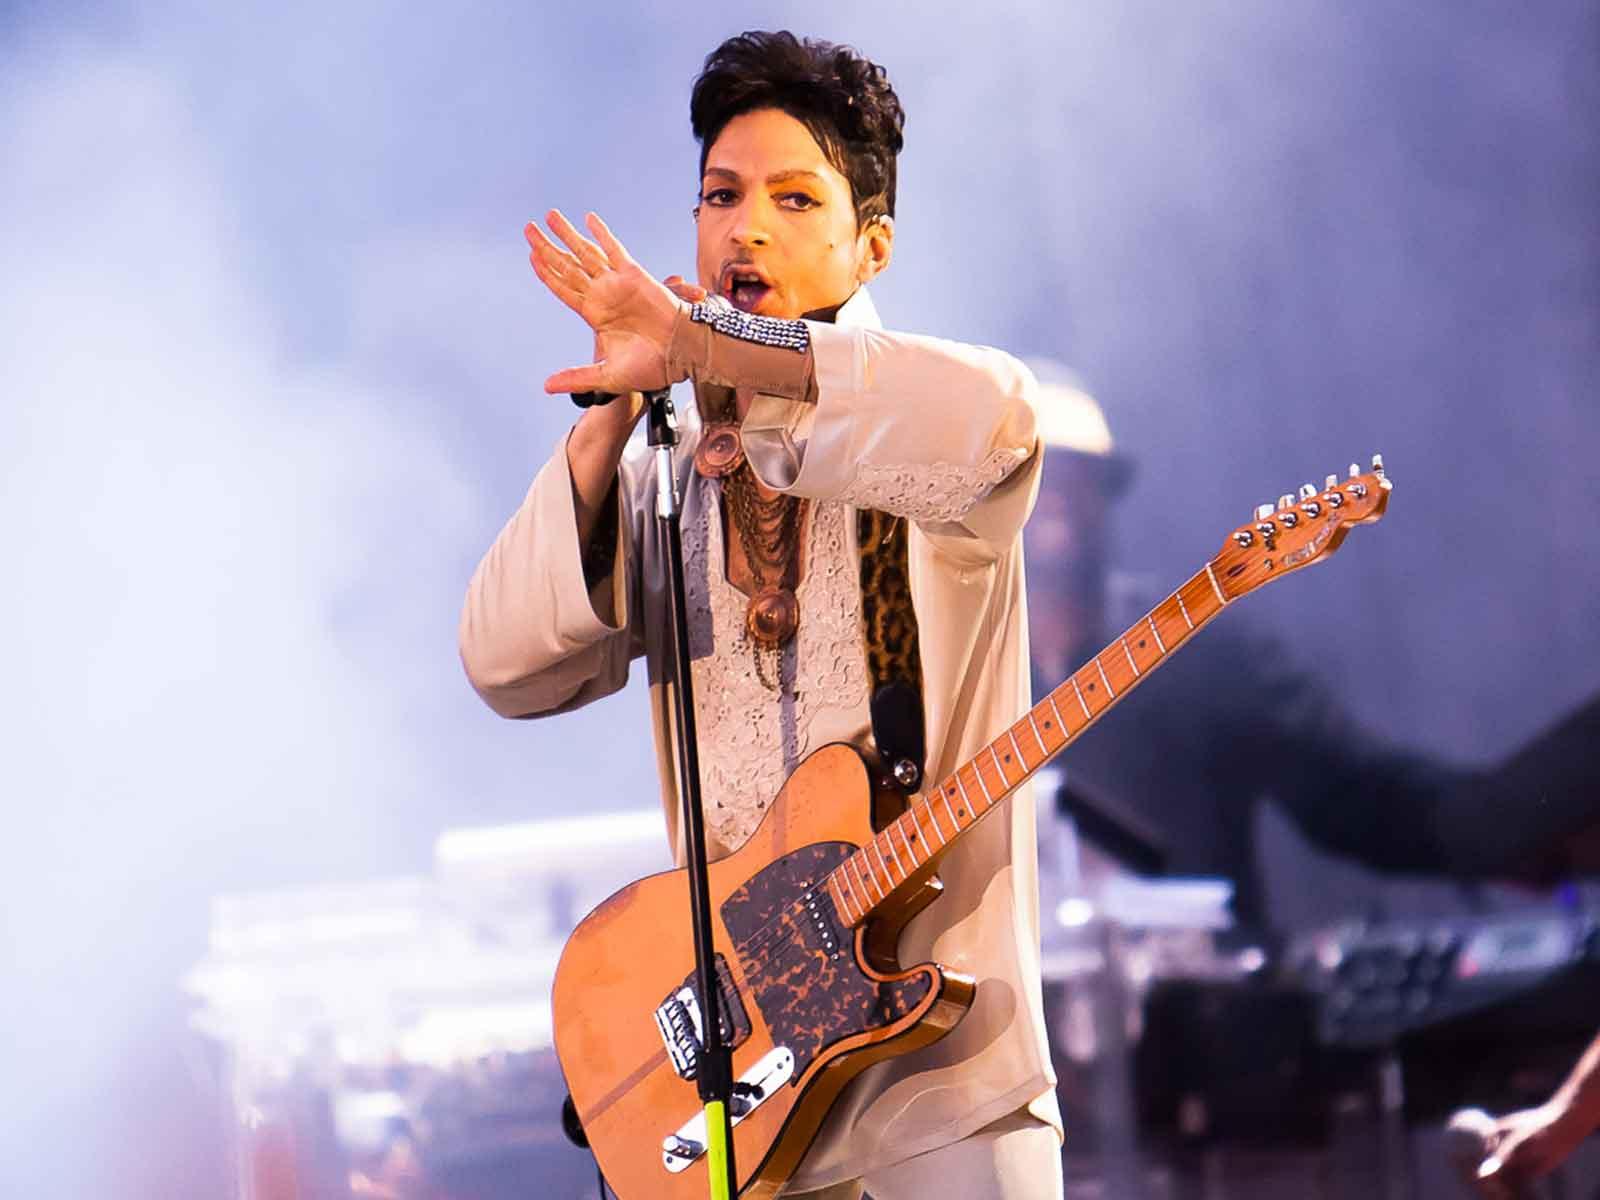 Woman Believes She Might Be Prince’s Long-Lost Daughter, Cites Her ‘Flamboyant’ Personality